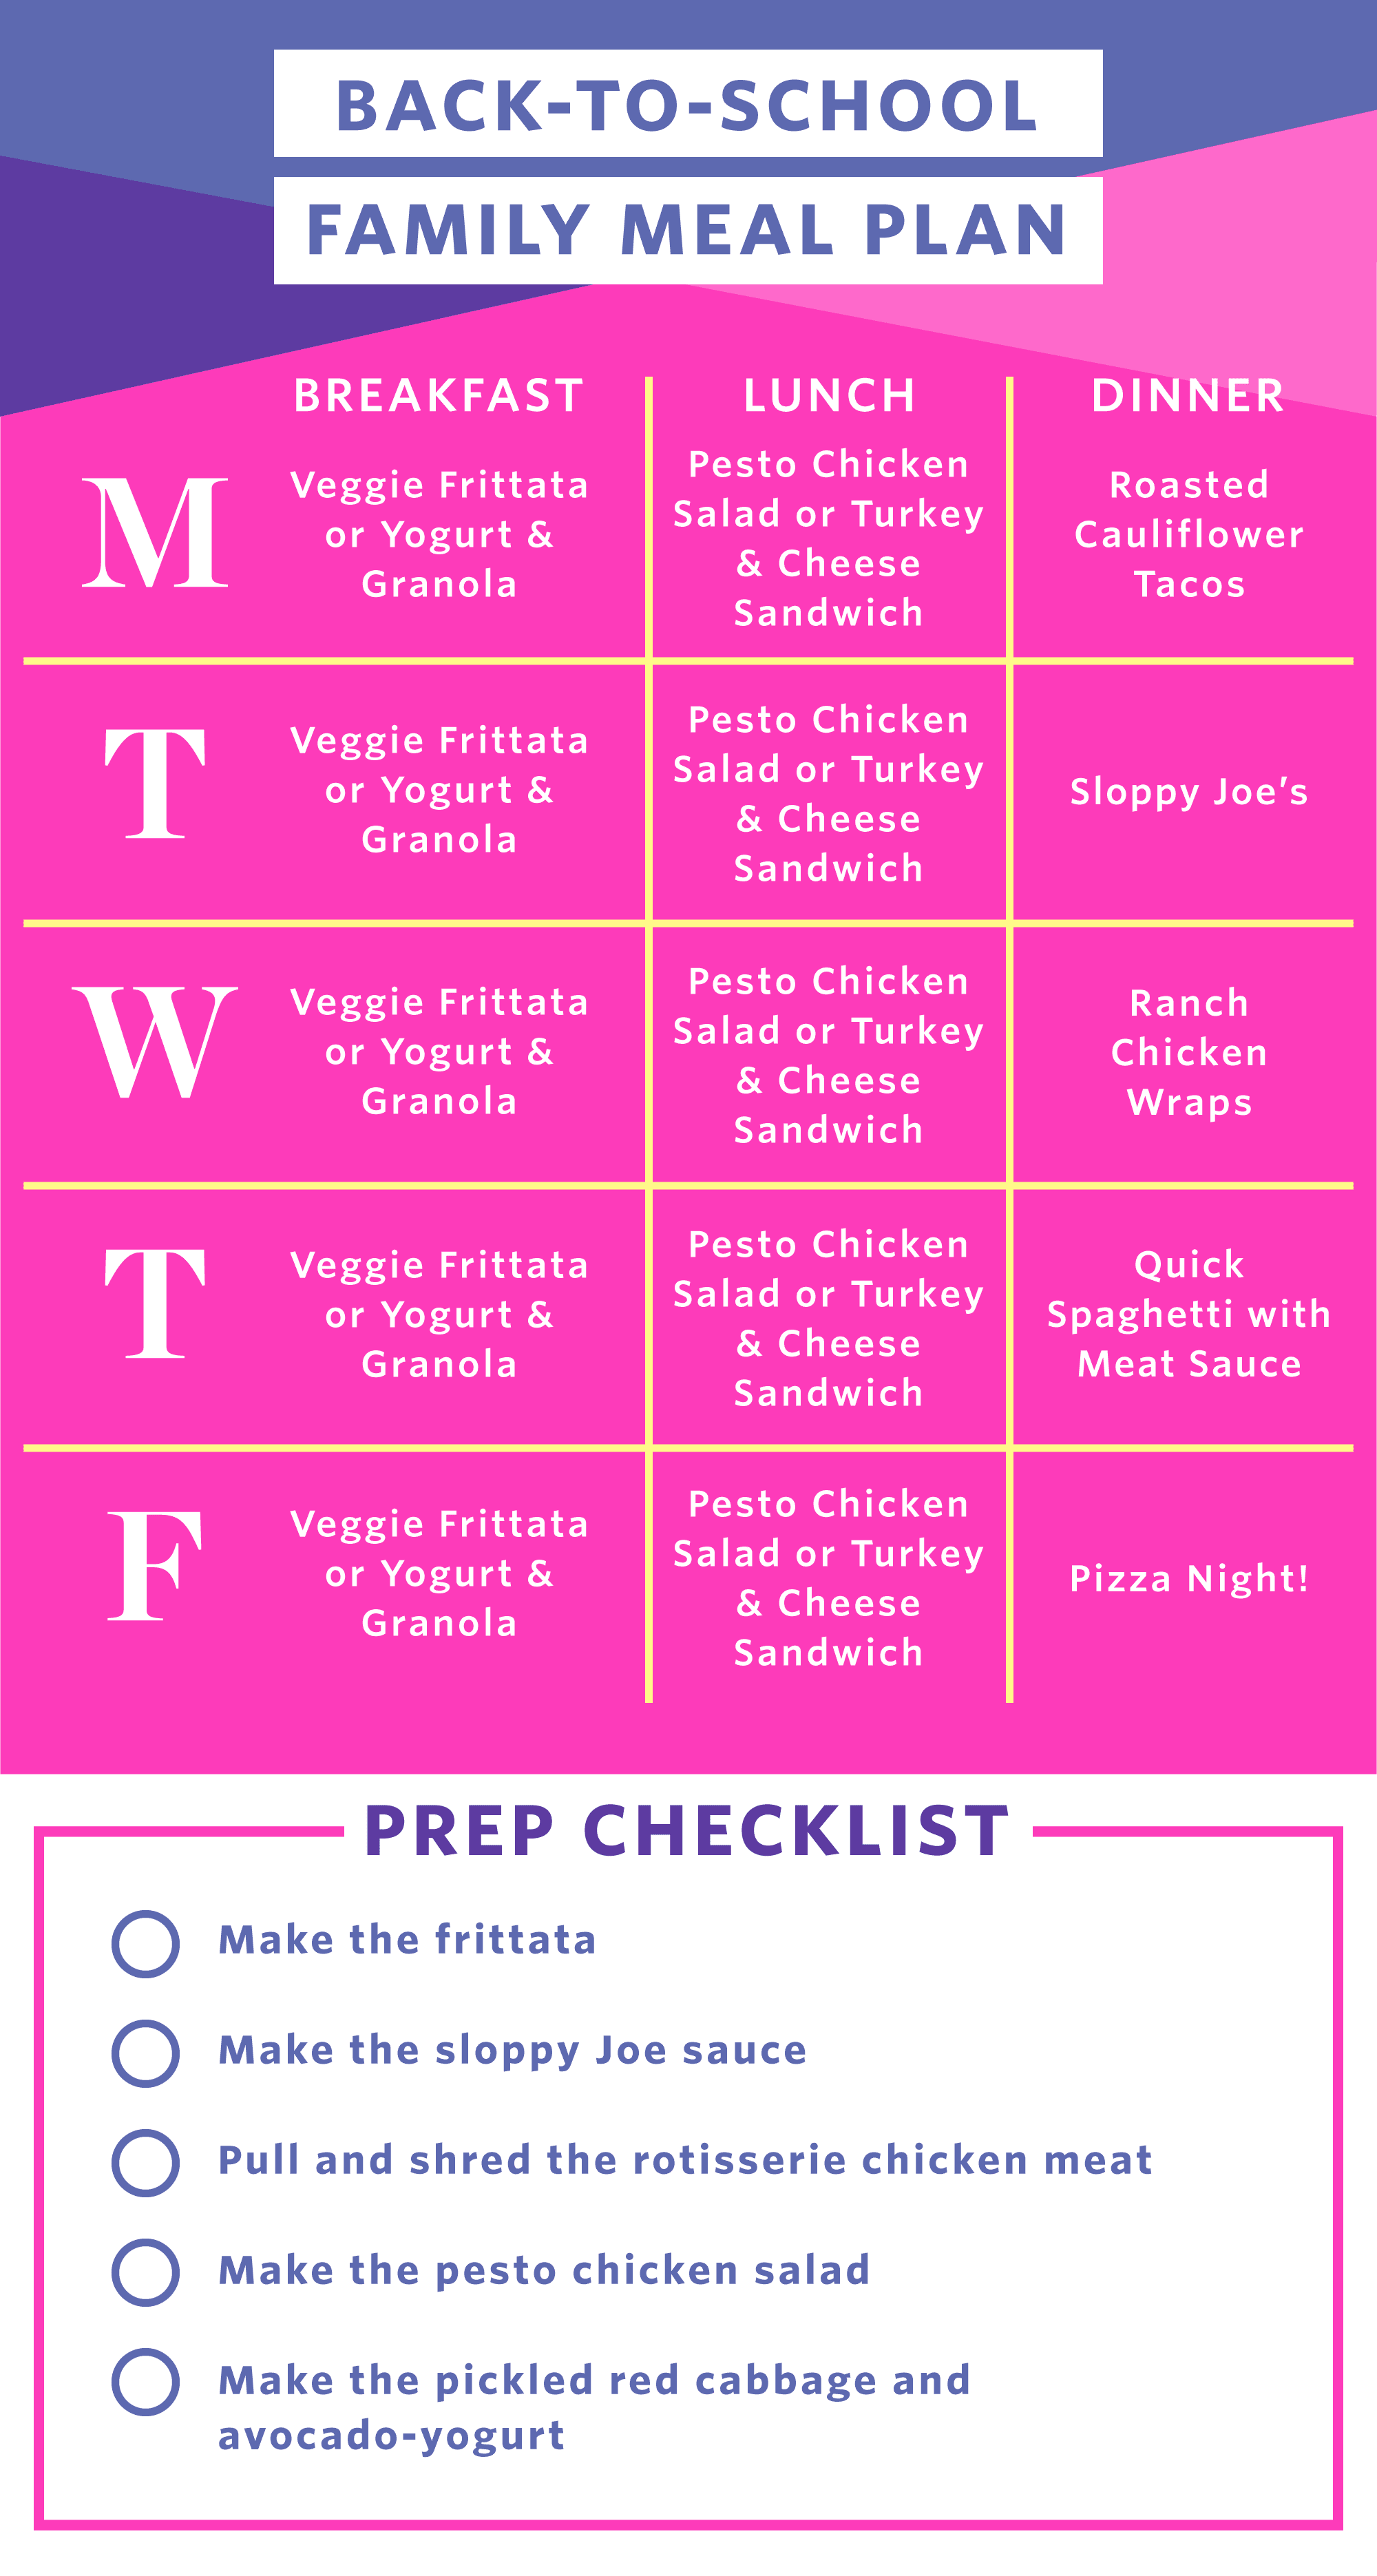 https://cdn.apartmenttherapy.info/image/upload/v1629312854/k/Photo/Series/2021-power-hour-how-i-prep-back-to-school/ph-back-to-school-family-meals.png